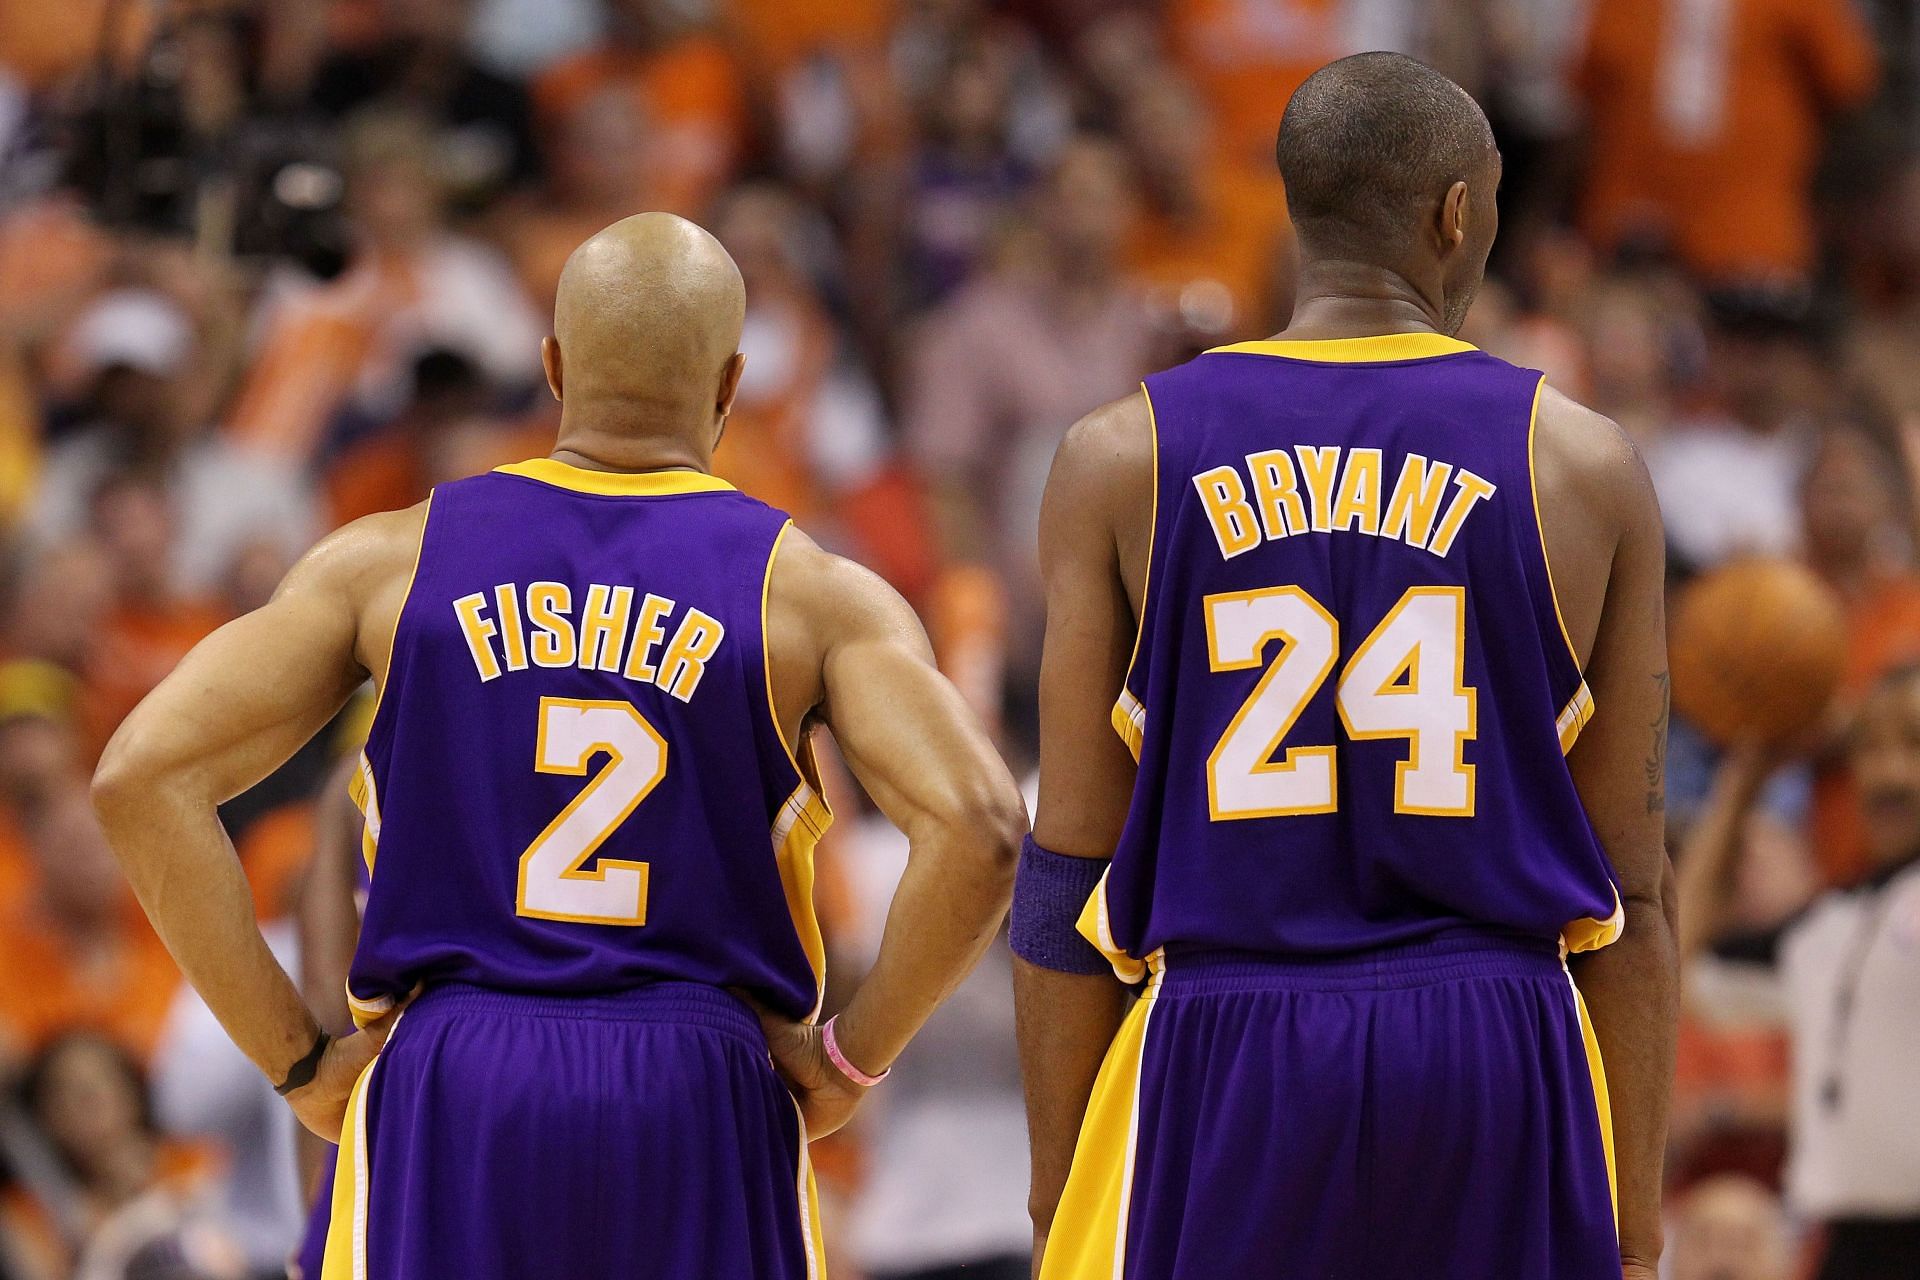 Fisher and Bryant won their last championship in 2010 (Image via Getty Images)